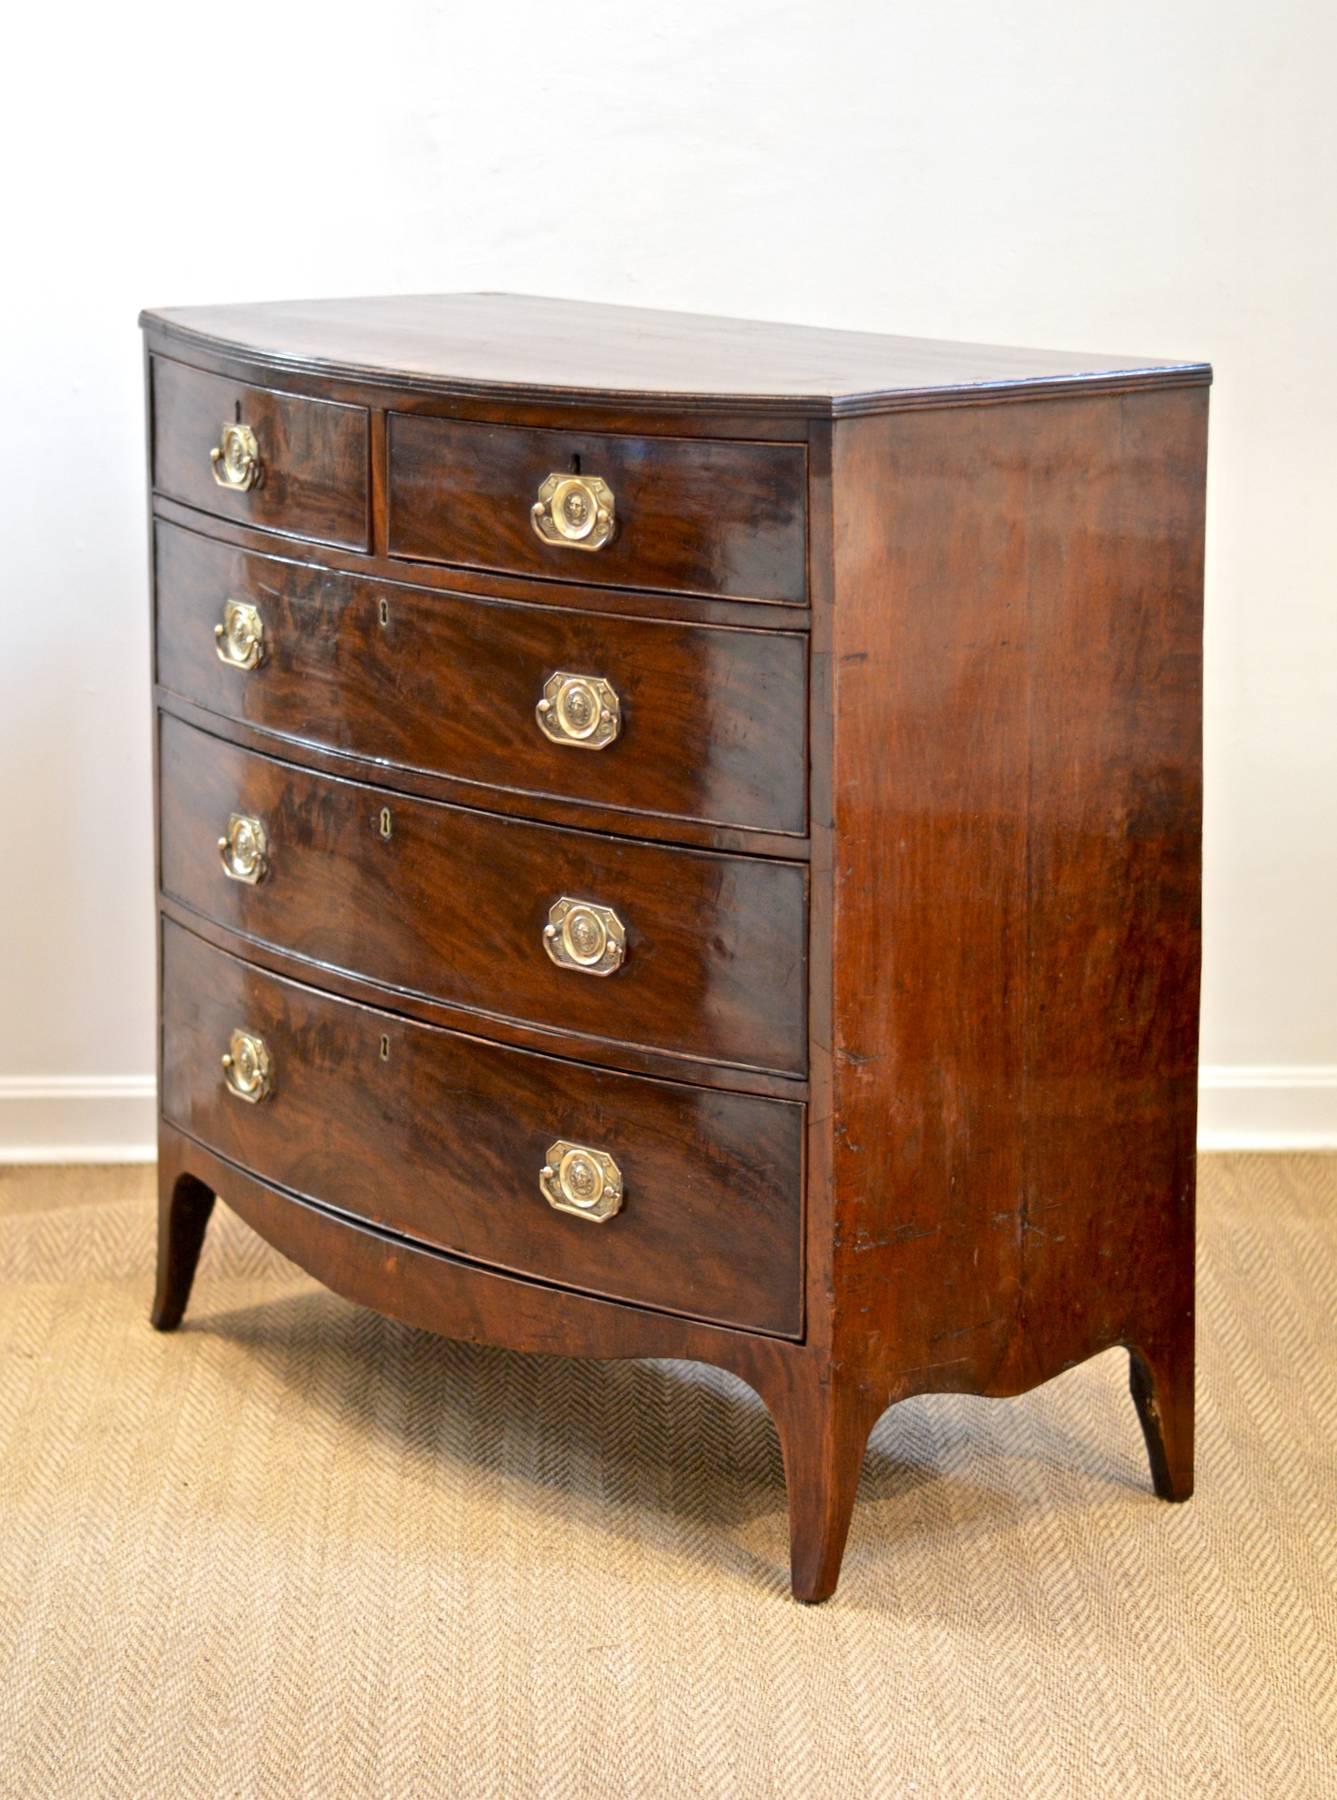 George IV Georgian Bowfront Chest of Drawers of Mahogany with Rare Brasses